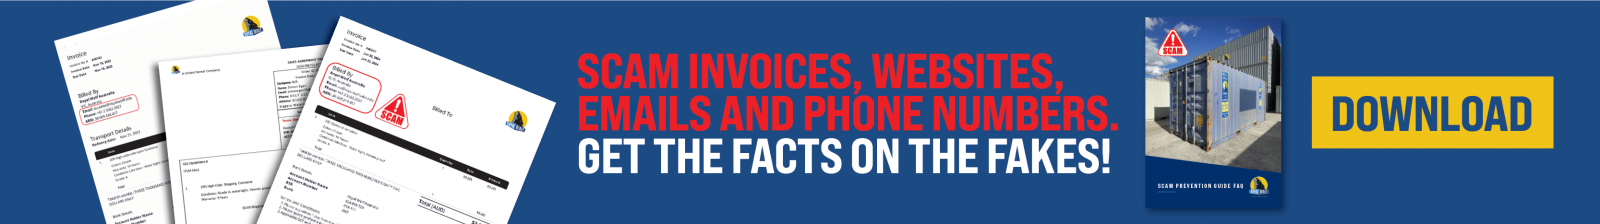 Scam Invoices, Websites, Emails and Phone Numbers. Get the facts on the fakes!